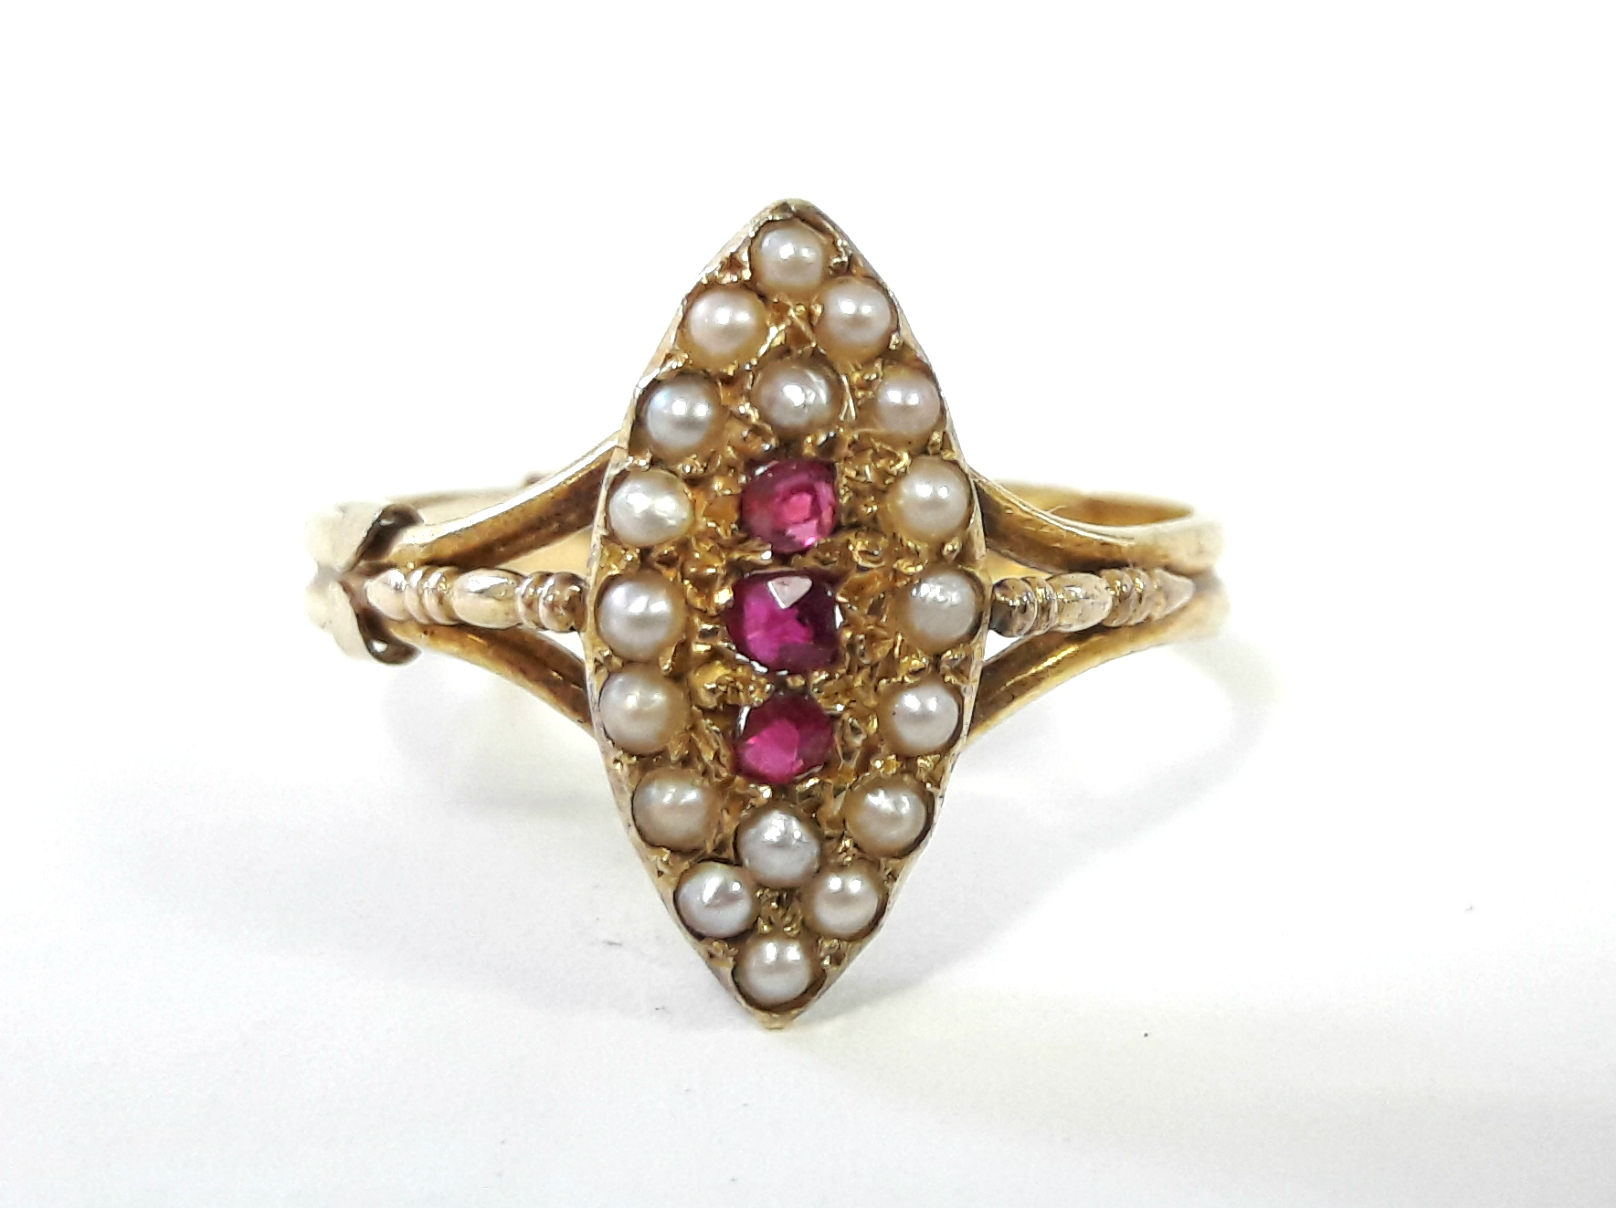 A 15ct. gold ring with navette shaped panel set three small rubies surrounded by seed pearls.